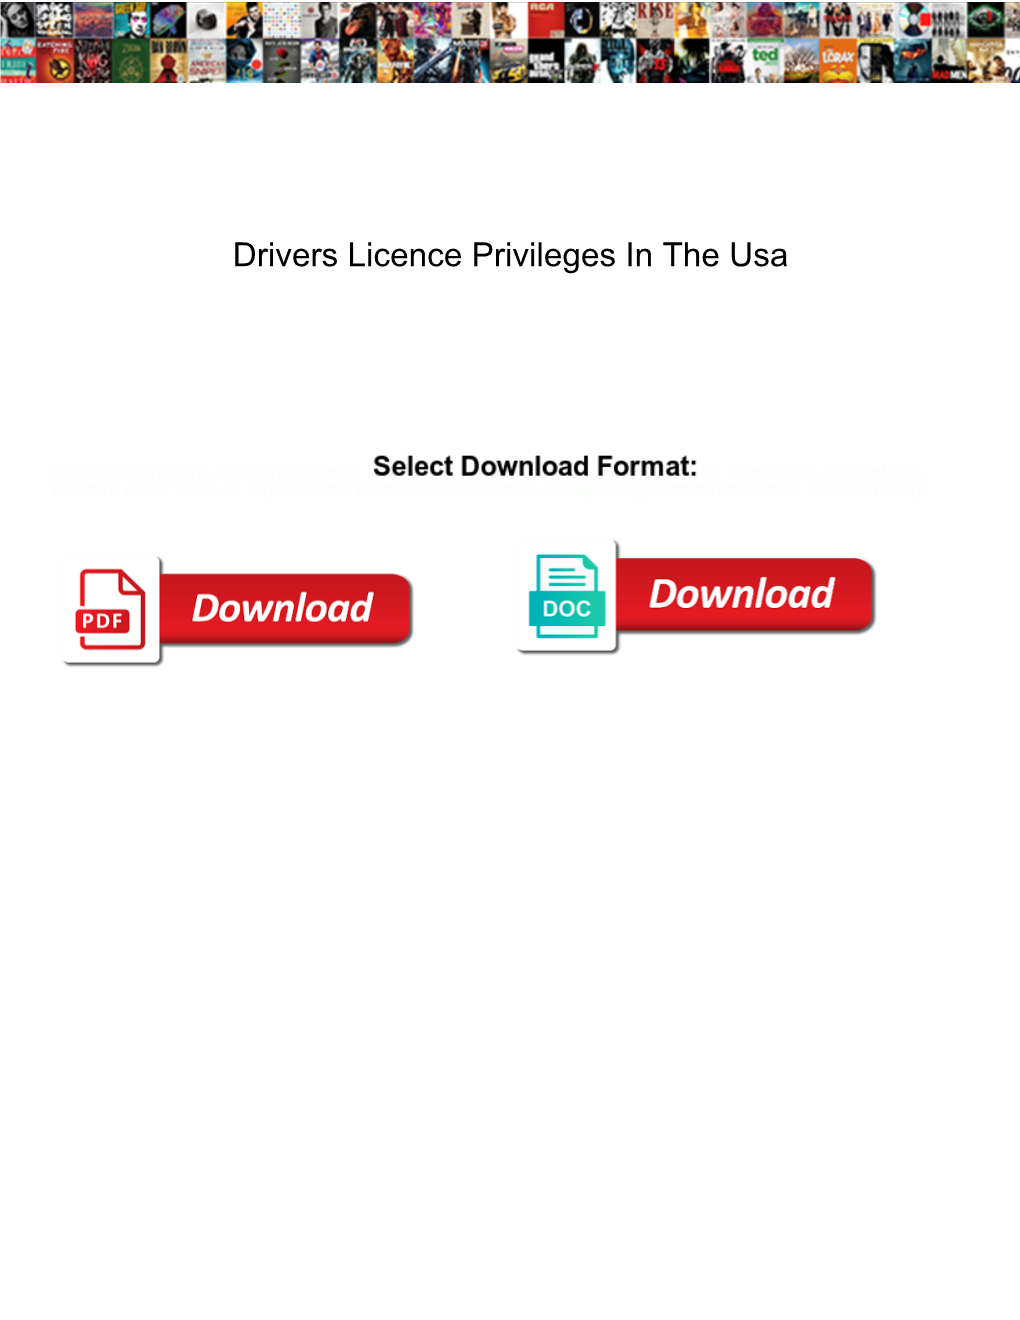 Drivers Licence Privileges in the Usa